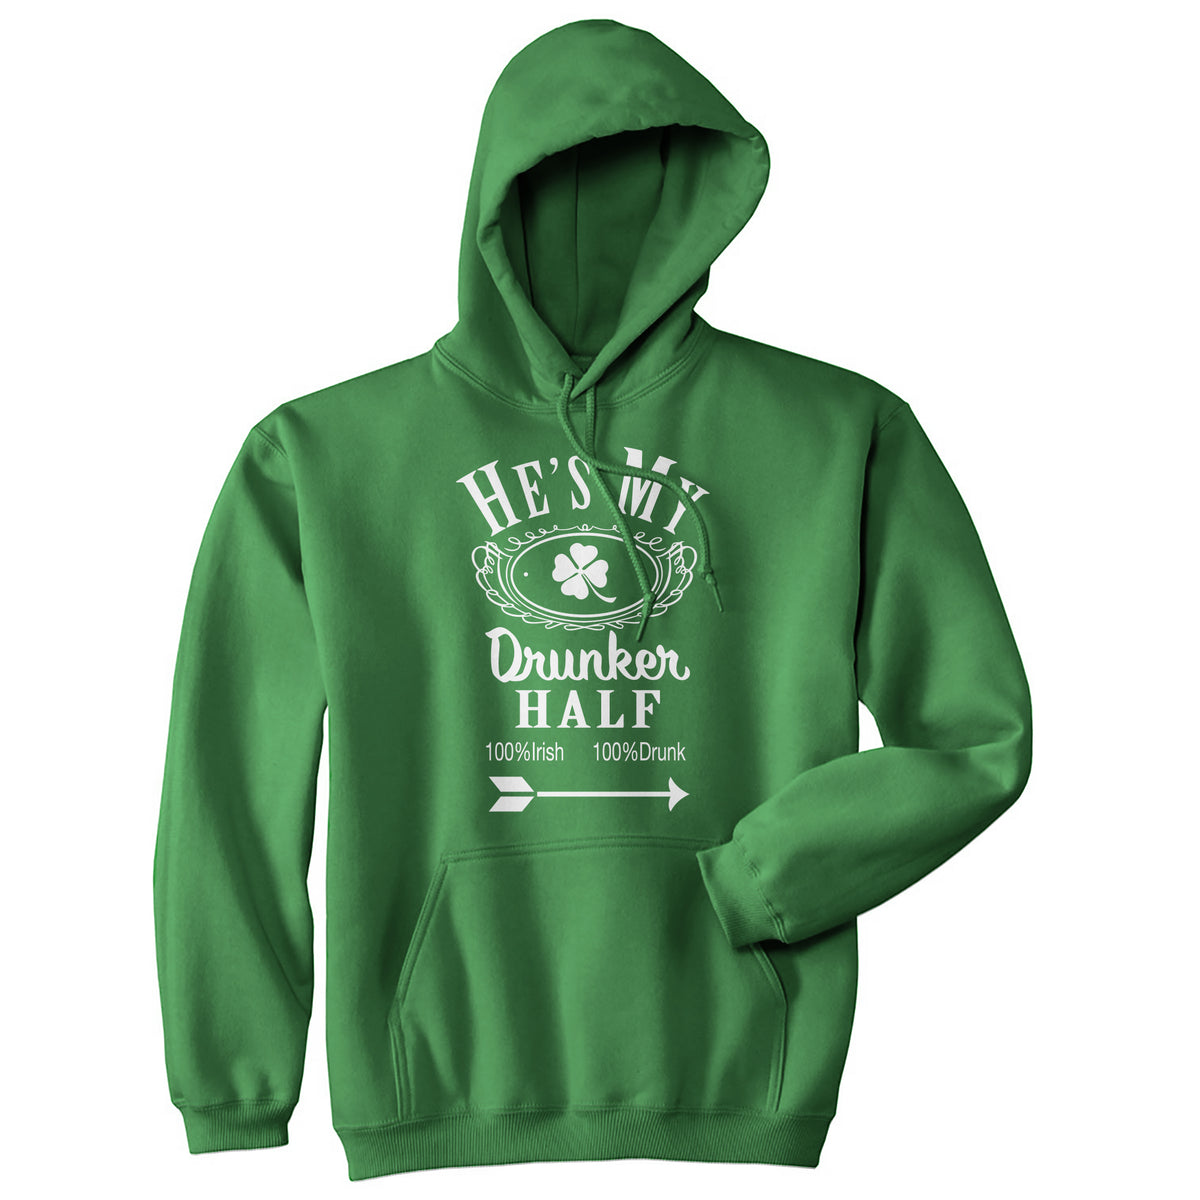 Funny Green Hes/Shes My Drunker Half Hoodie Hoodie Nerdy Saint Patrick&#39;s Day Drinking Tee